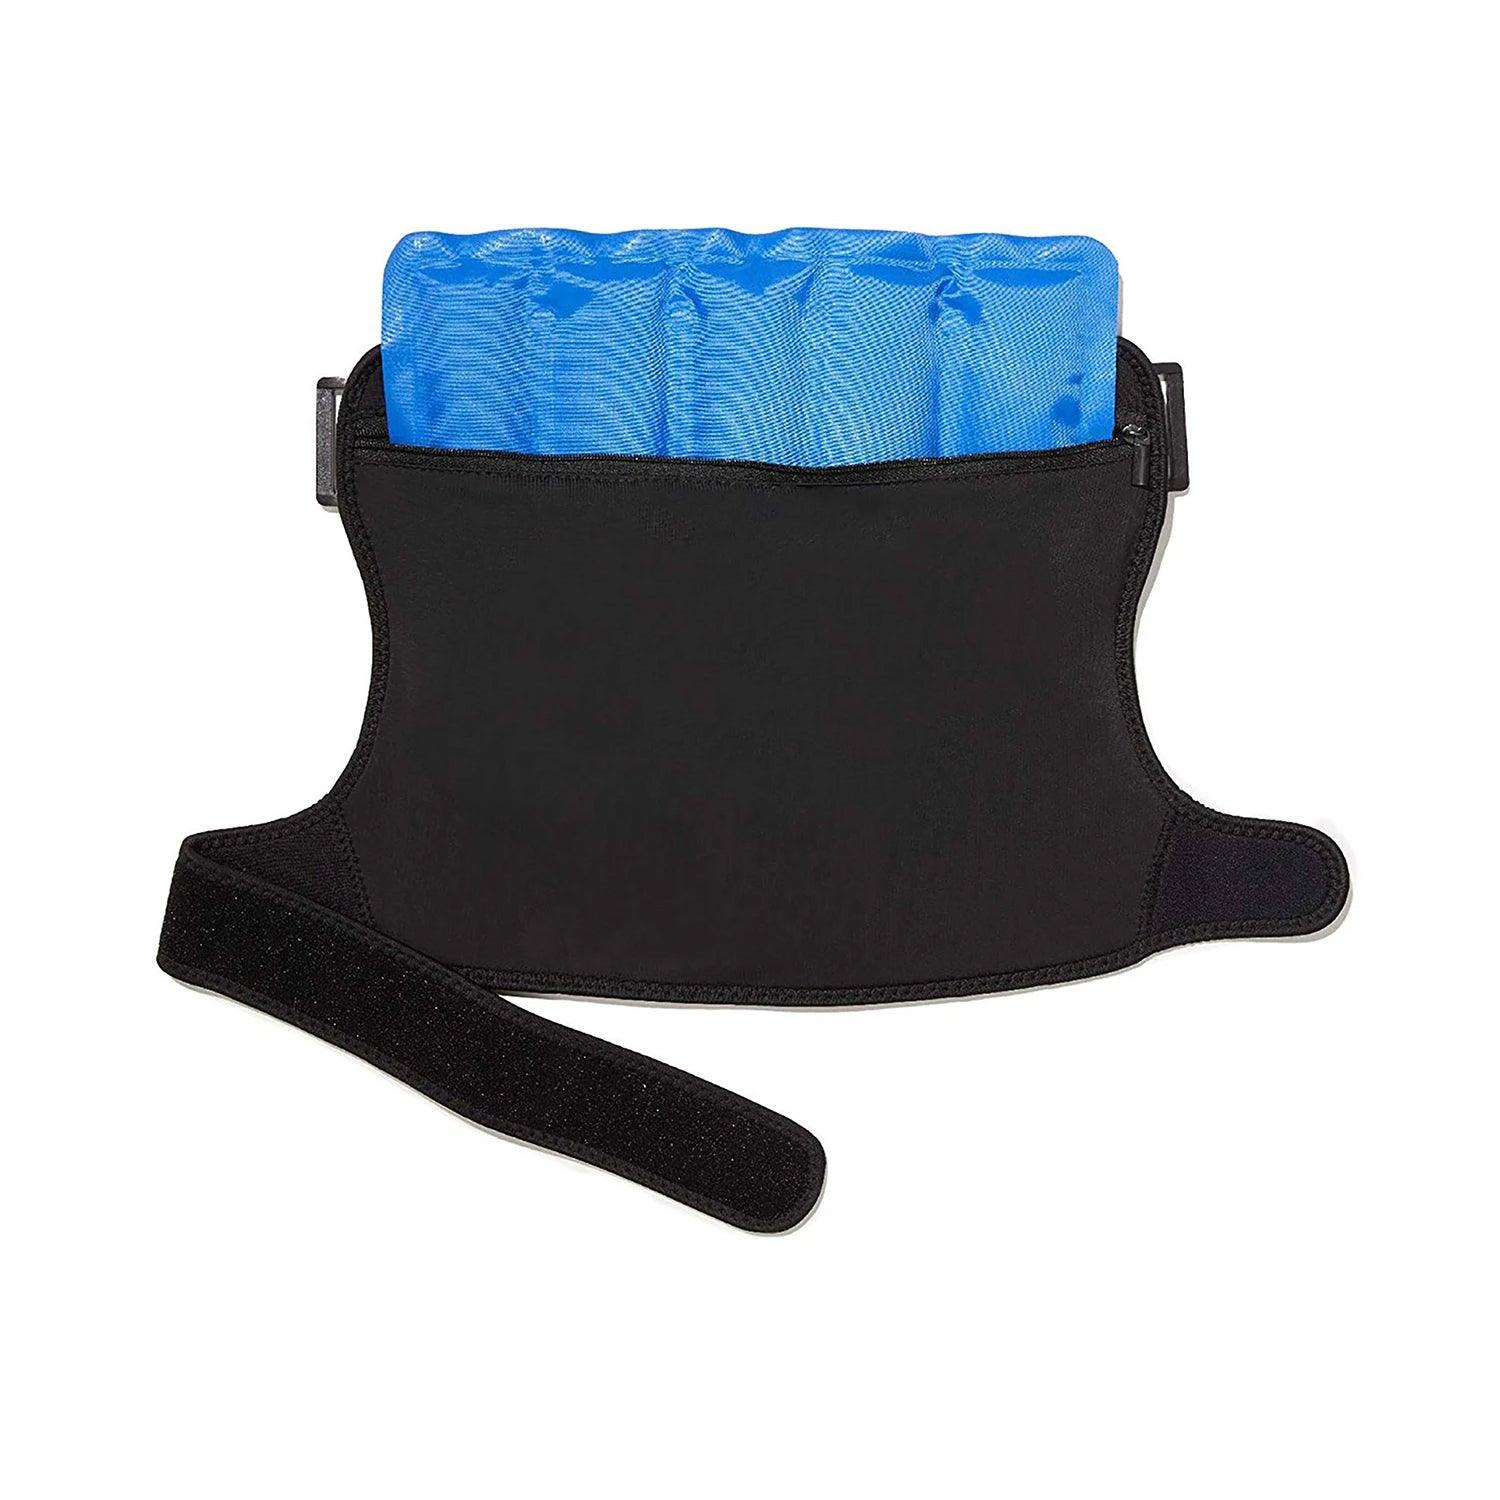 Advanced Universal Shoulder Support with Hot & Cold Compression